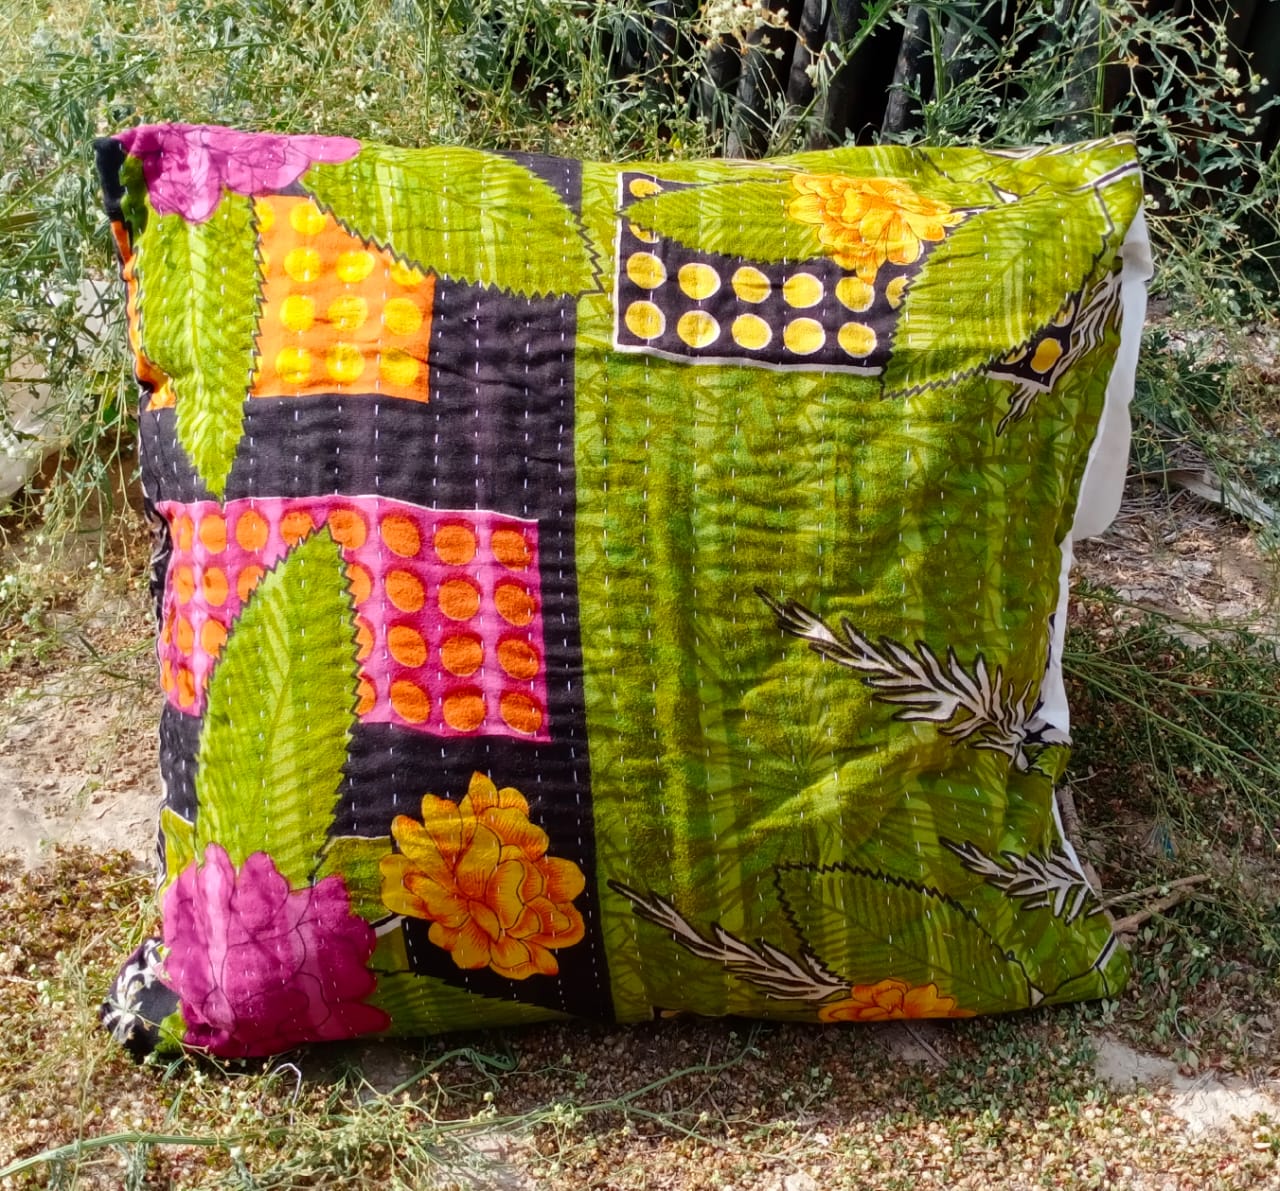 Vintage Kantha Cushion Cover- Assorted - The Teal Thread